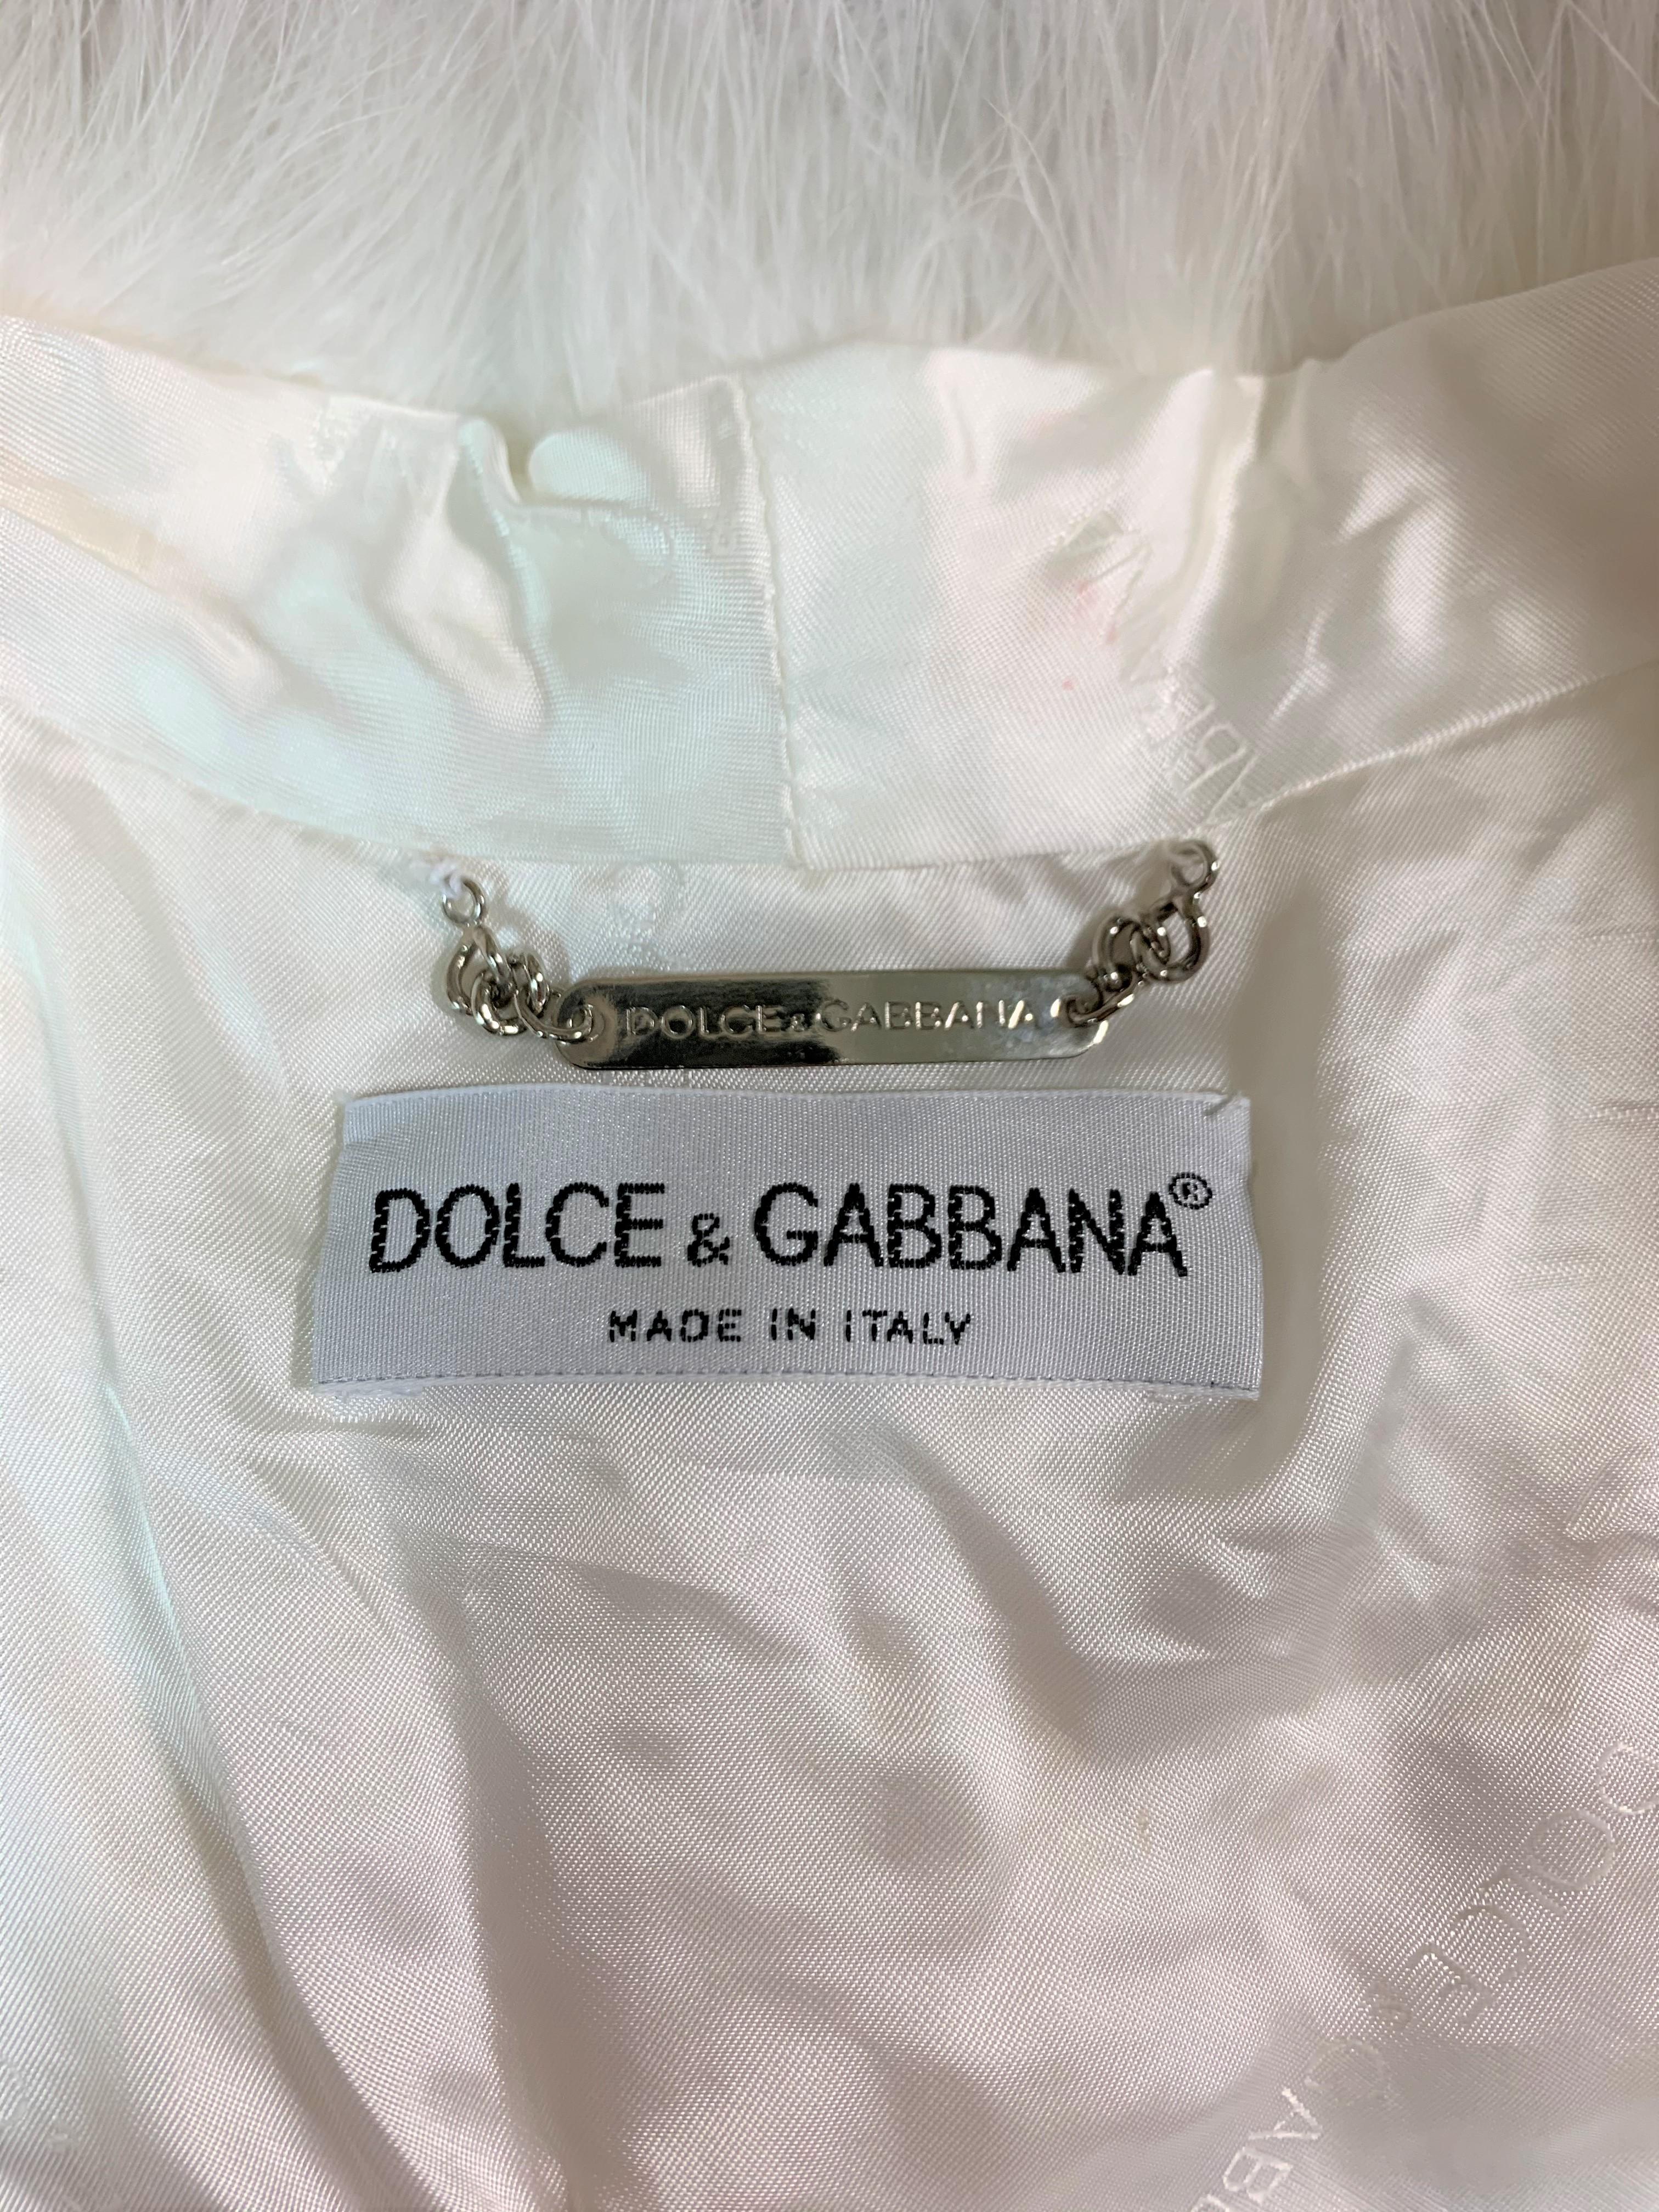 Women's S/S 1995 Dolce & Gabbana Runway White Feather Cropped Jacket & Hat